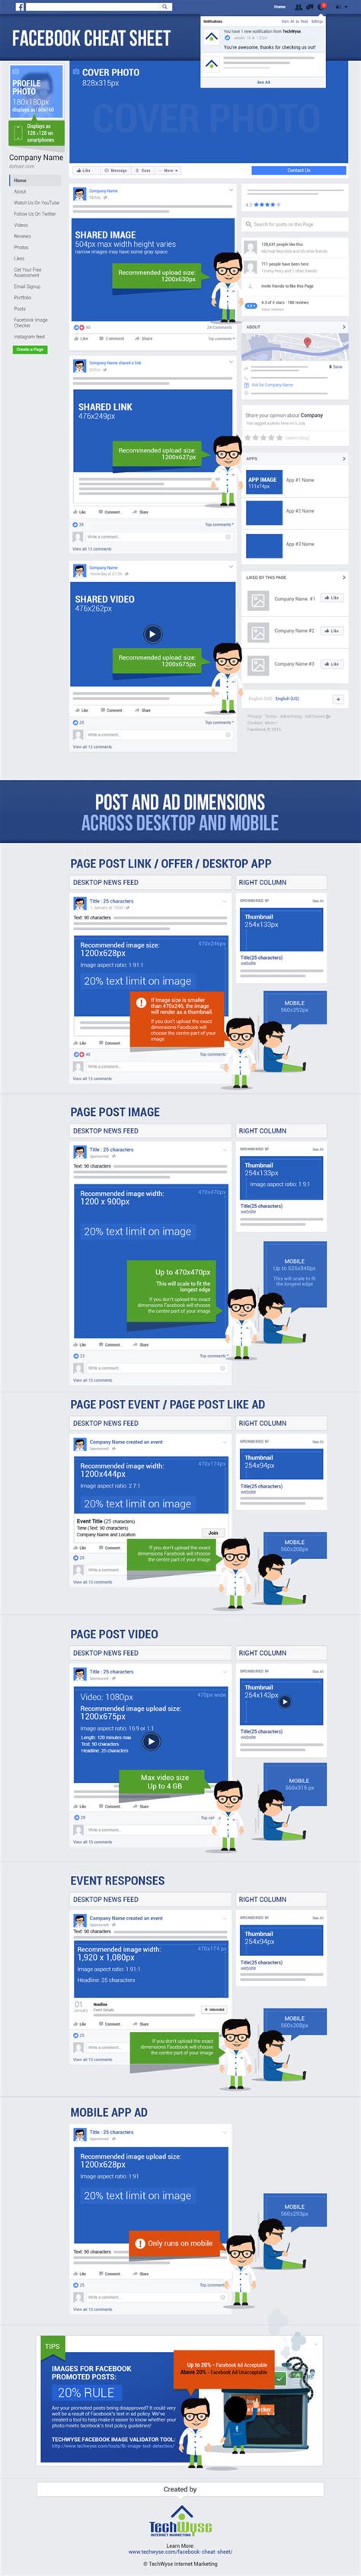 Facebook Image Sizes And Dimensions Cheatsheet Infographic Reverasite